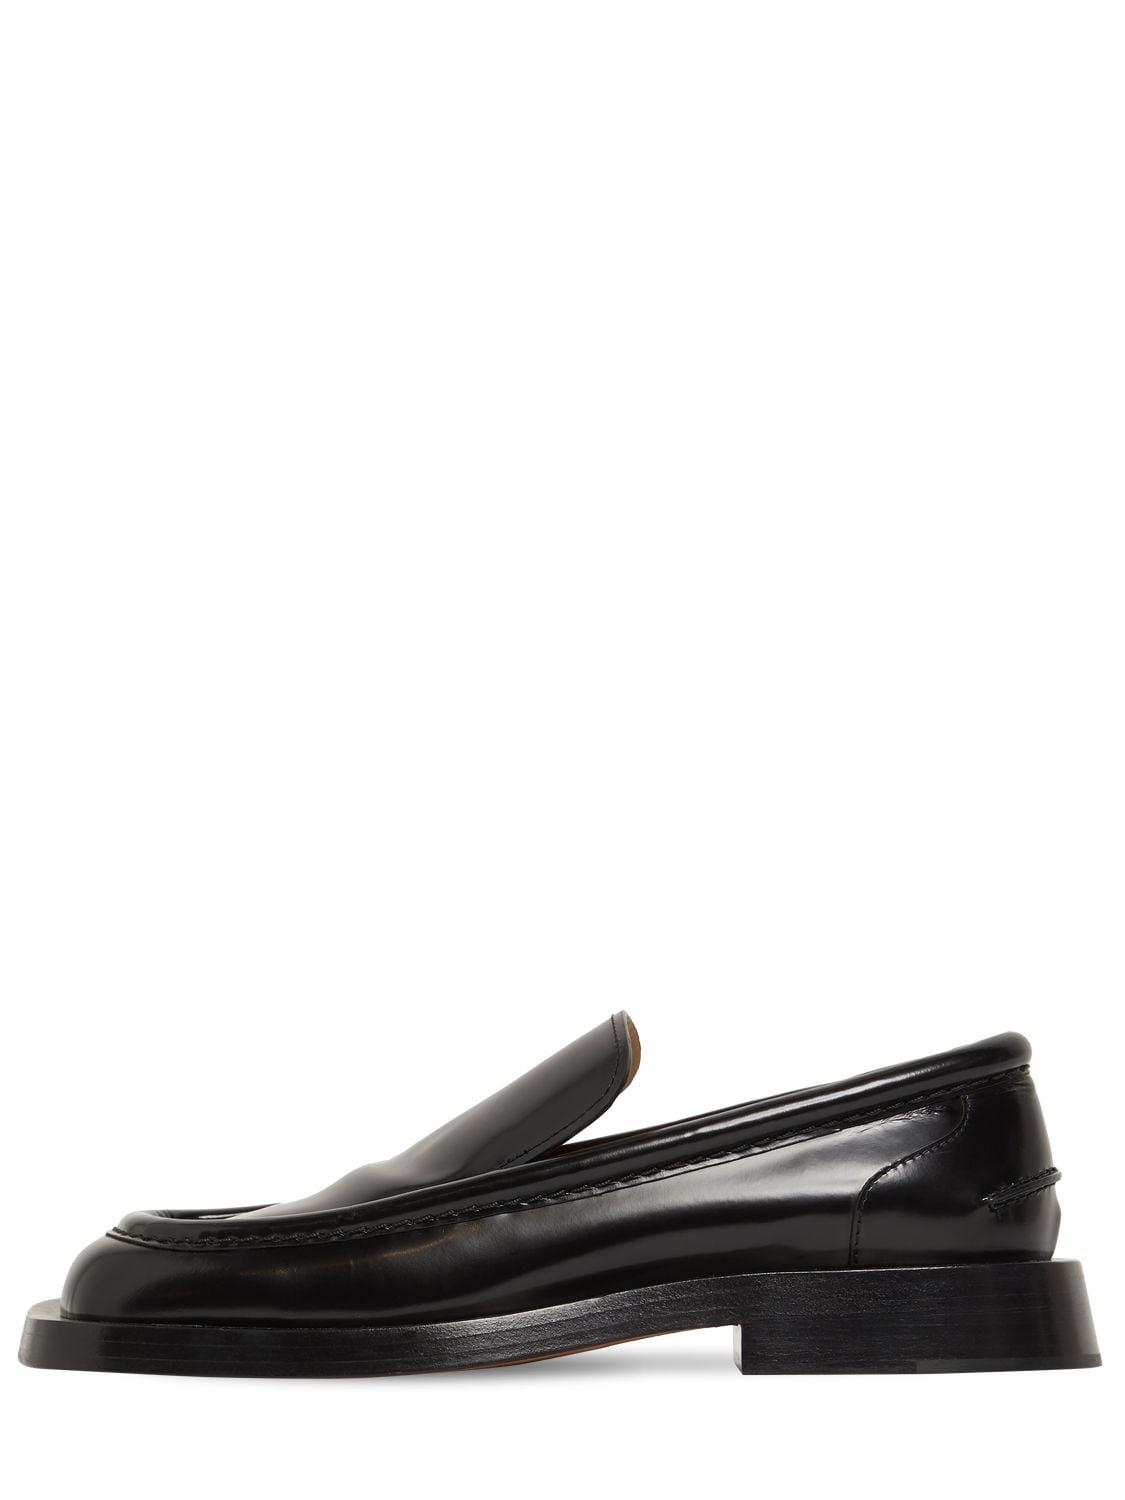 Proenza Schouler - 20mm square brushed leather loafers - Black